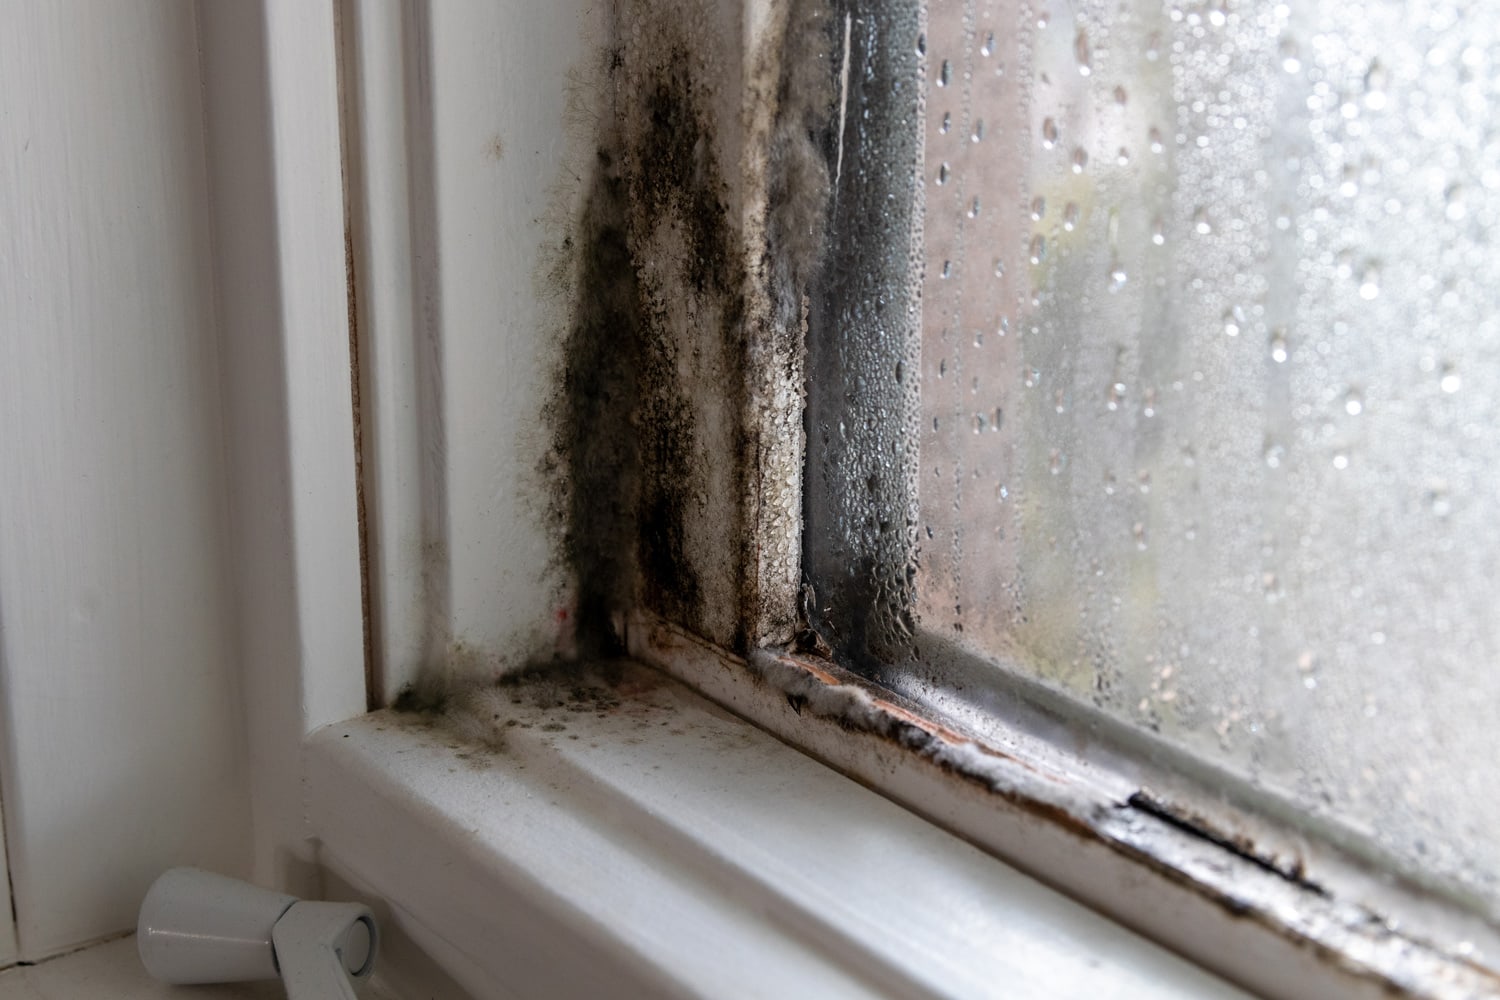 Corner of window frame covered in mold, Moist mold and fungus in window and frame